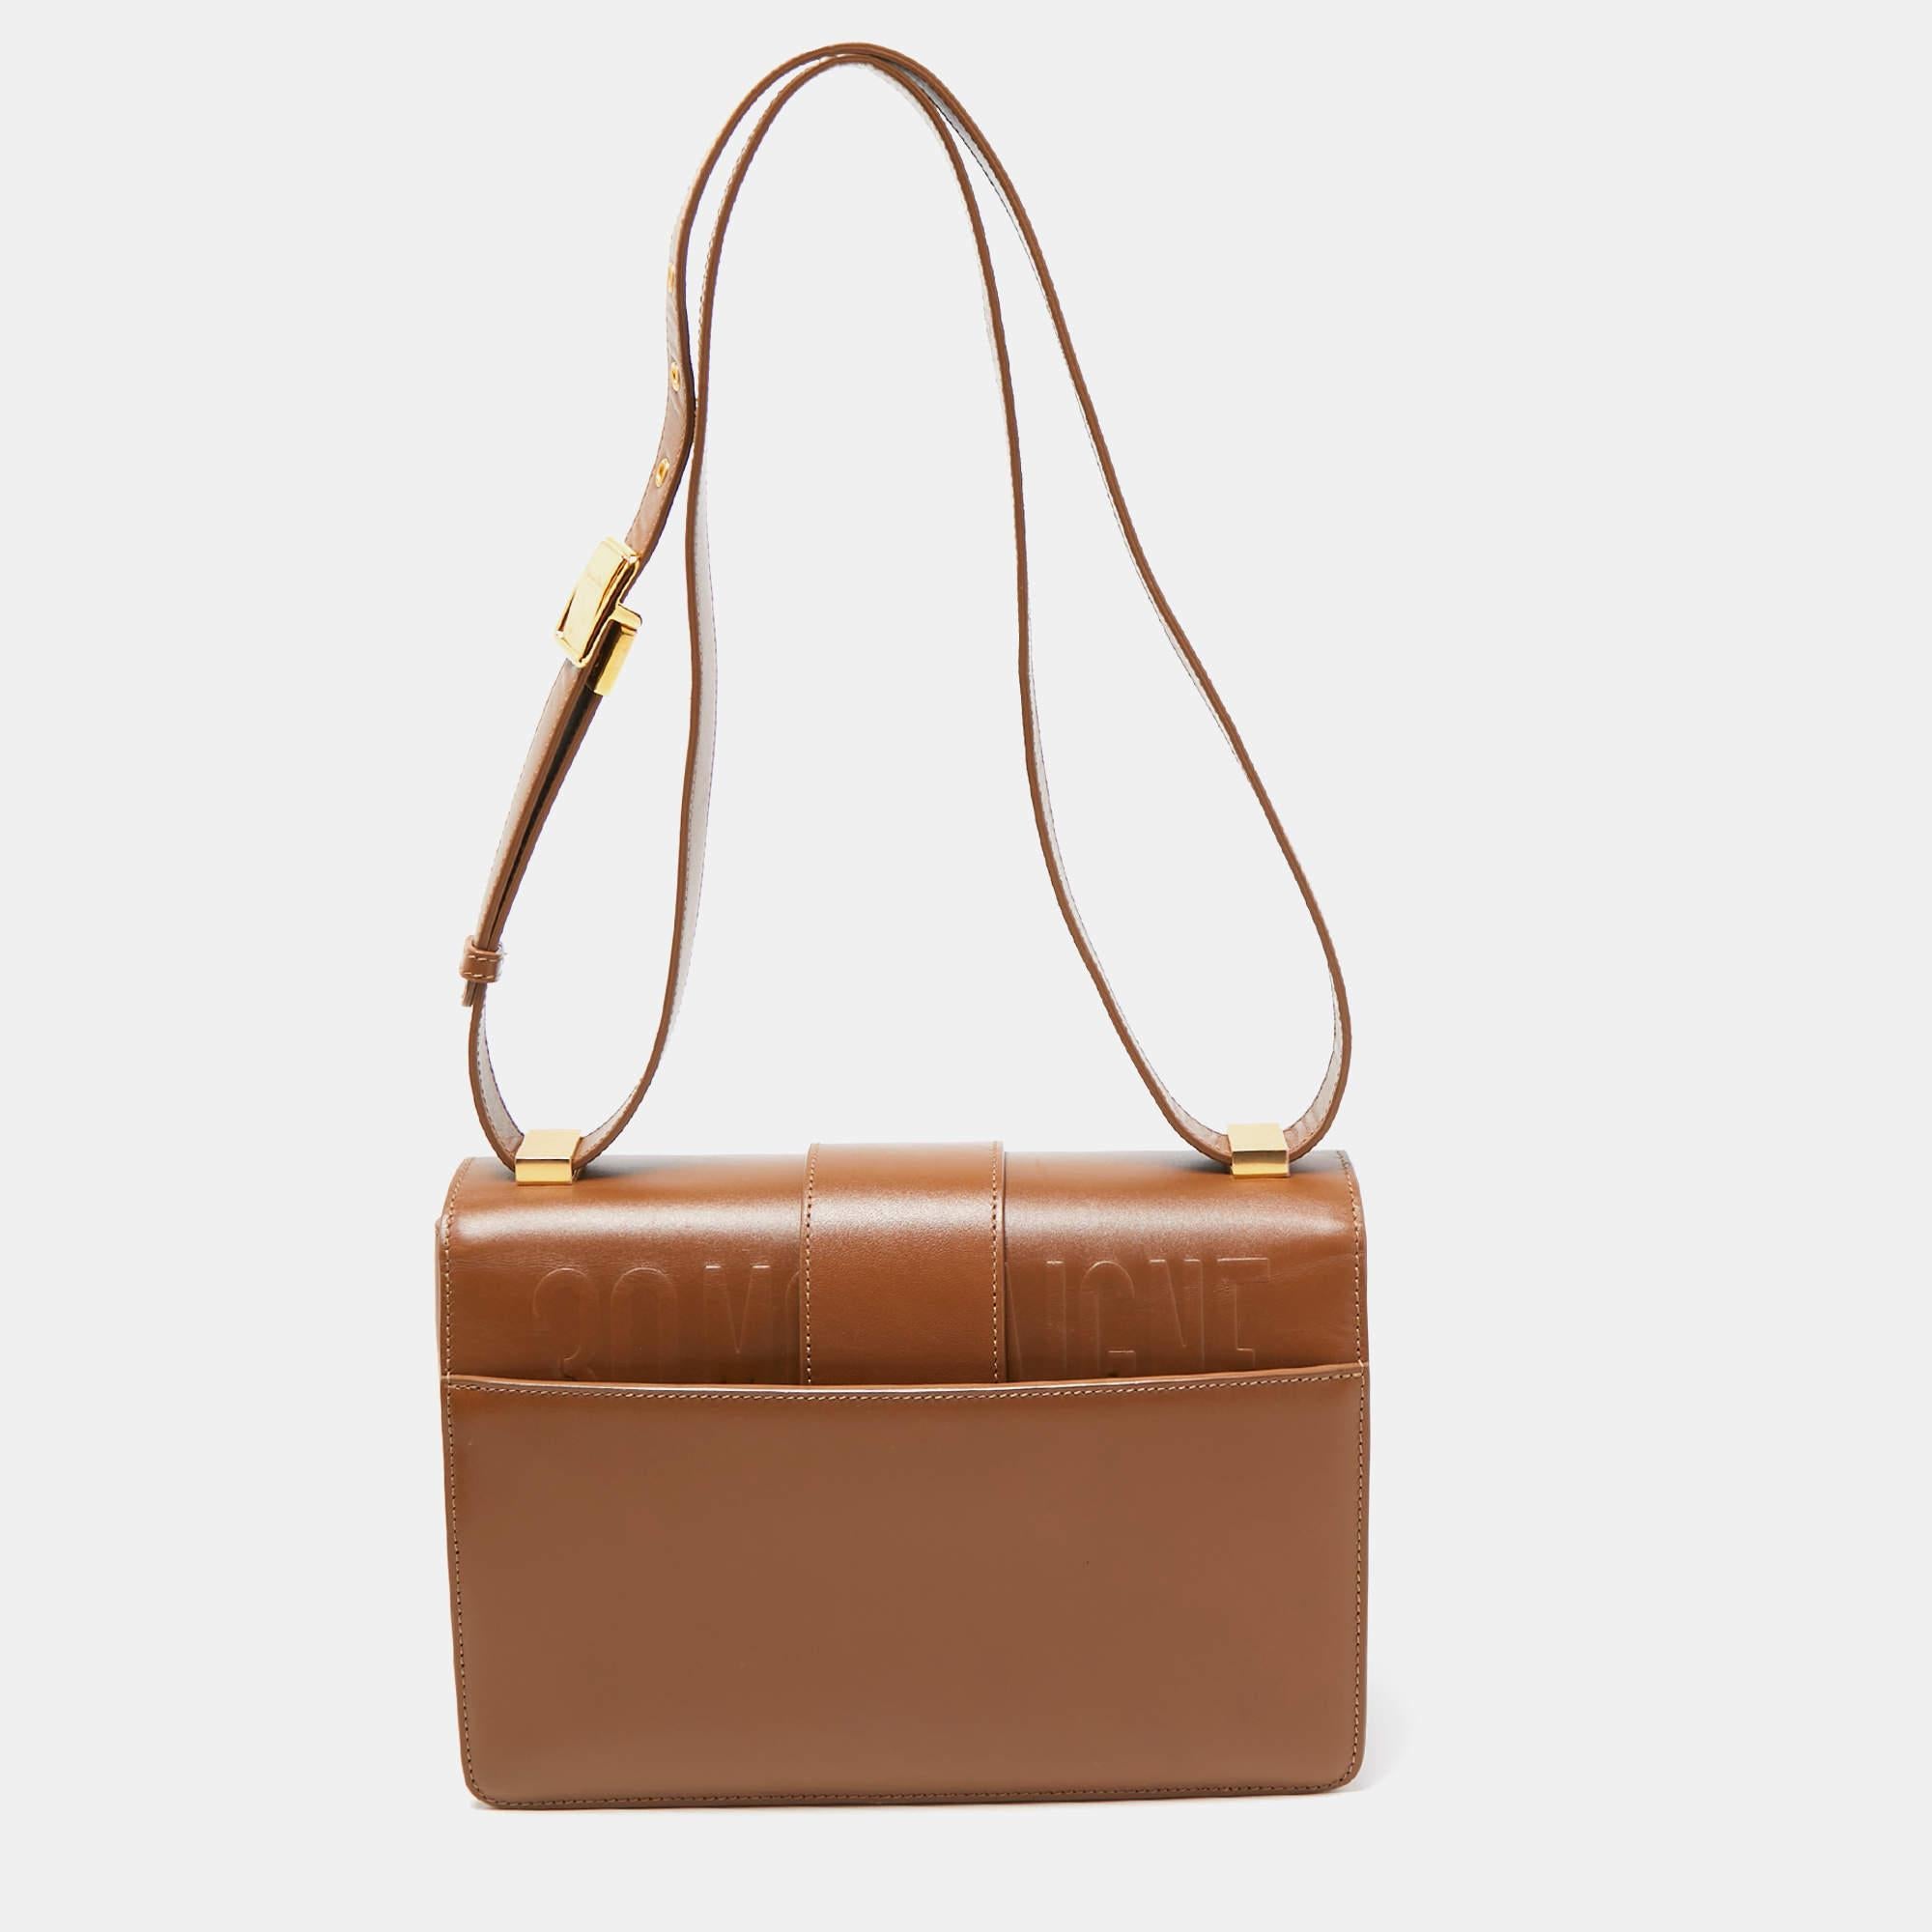 This 30 Montaigne bag from Dior derives inspiration from this historical address. Crafted from brown leather, this gorgeous number comes with a spacious leather interior that features a zipped compartment. It is equipped with a leather shoulder